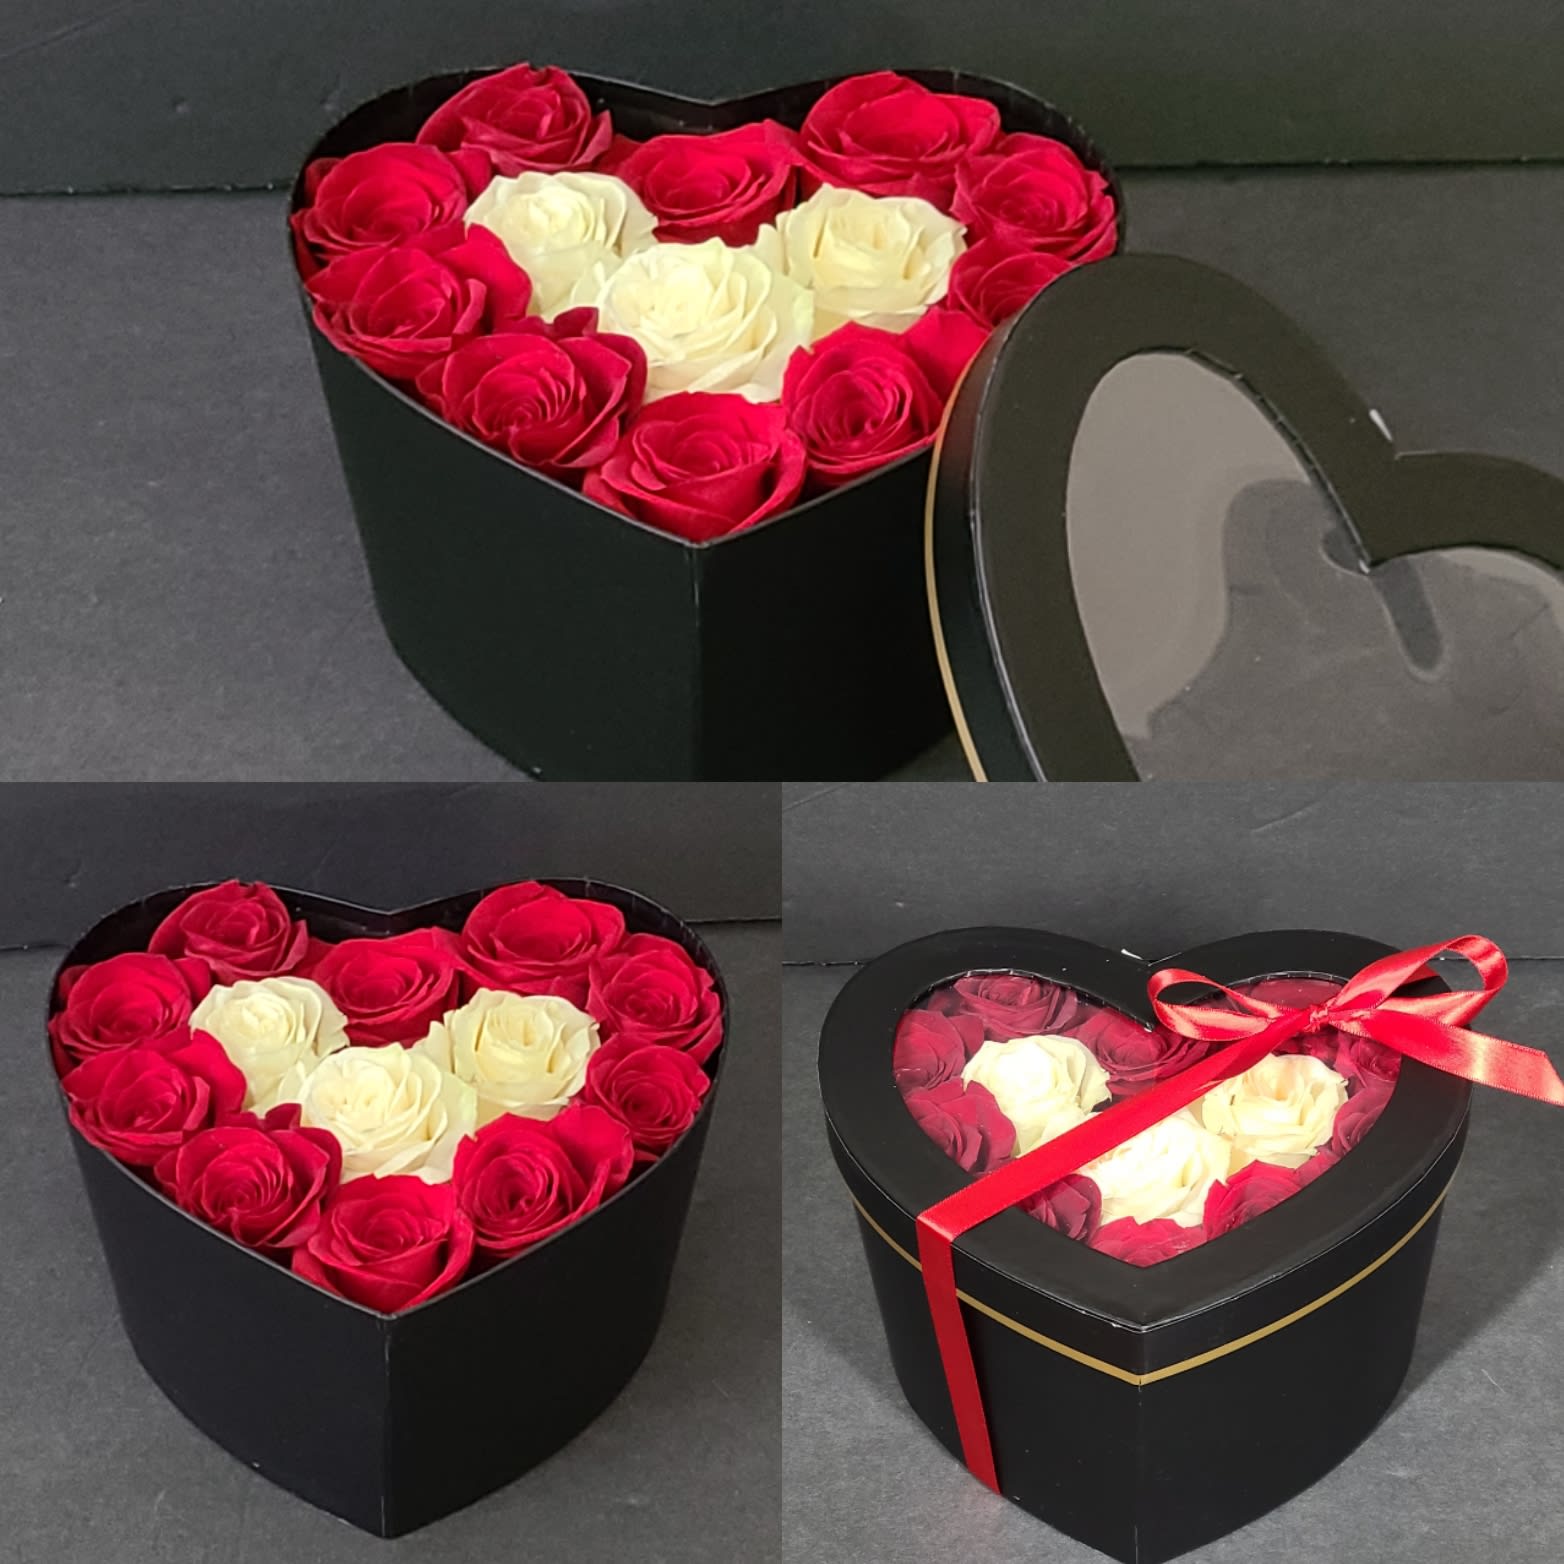 Set of 2, Double-Hearts Flower/Gift Boxes, Black/White/Pink/Red